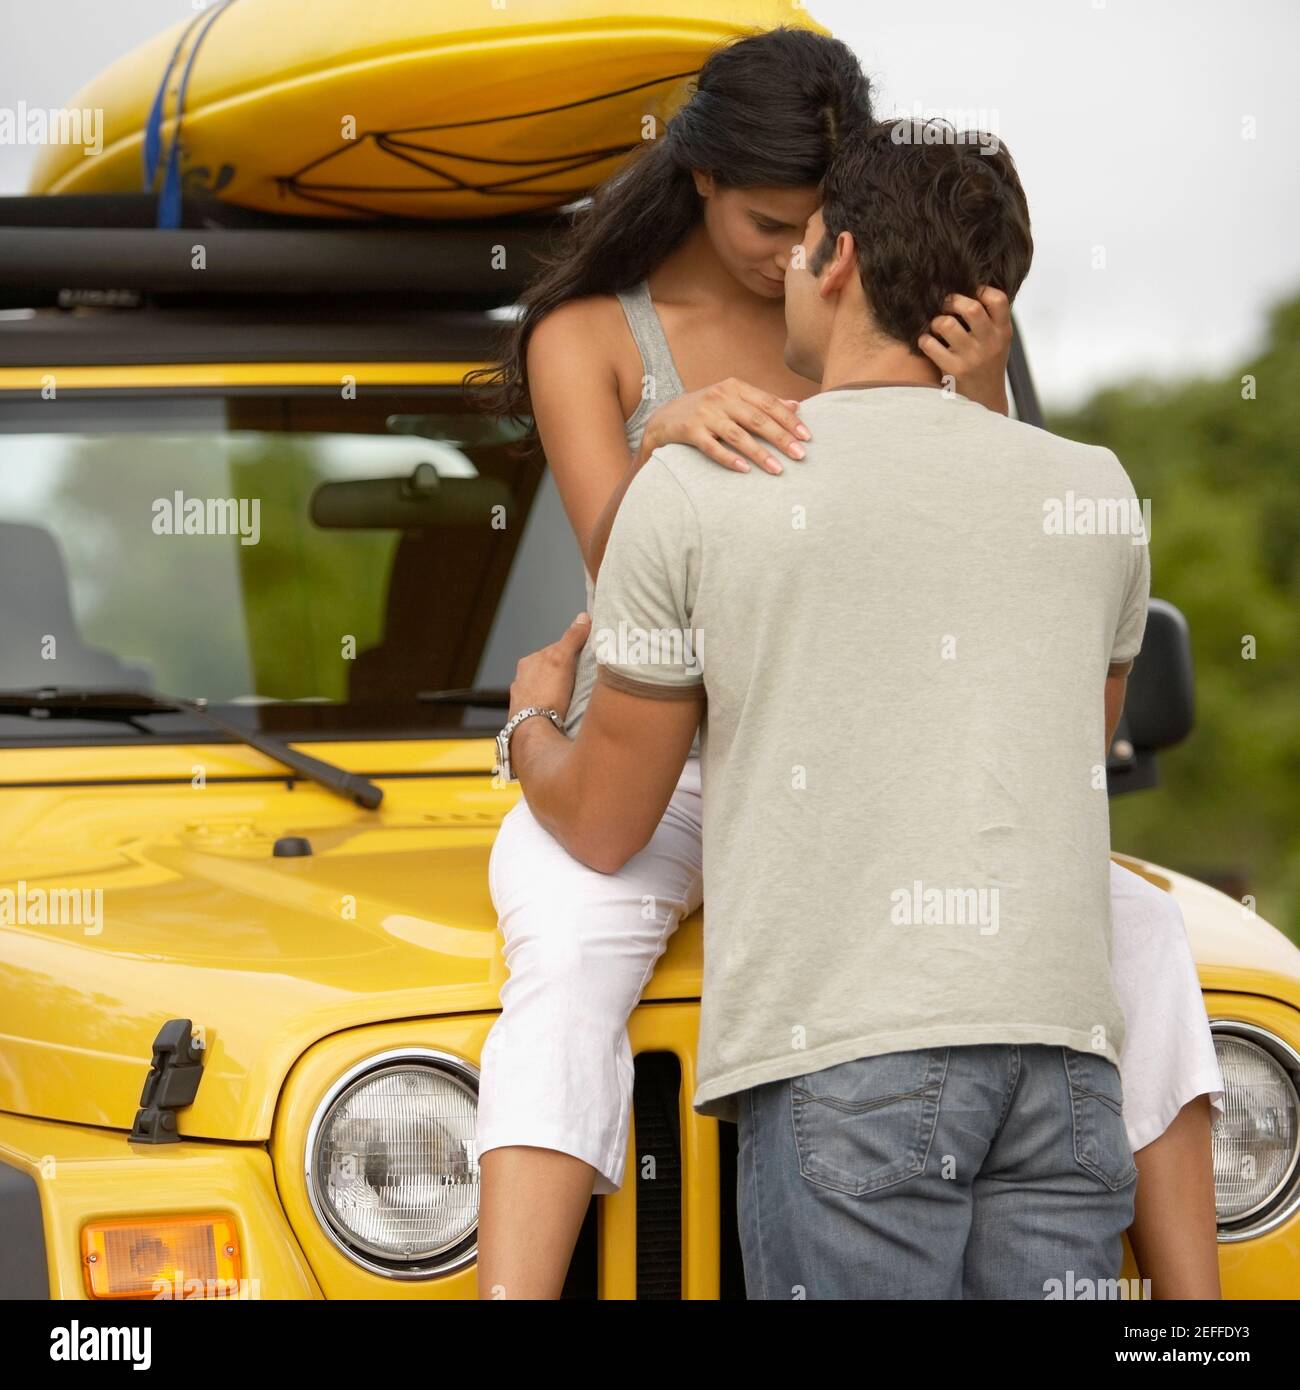 Romantic, Young Couple Sitting On The Bonnet Stock Photo, Picture